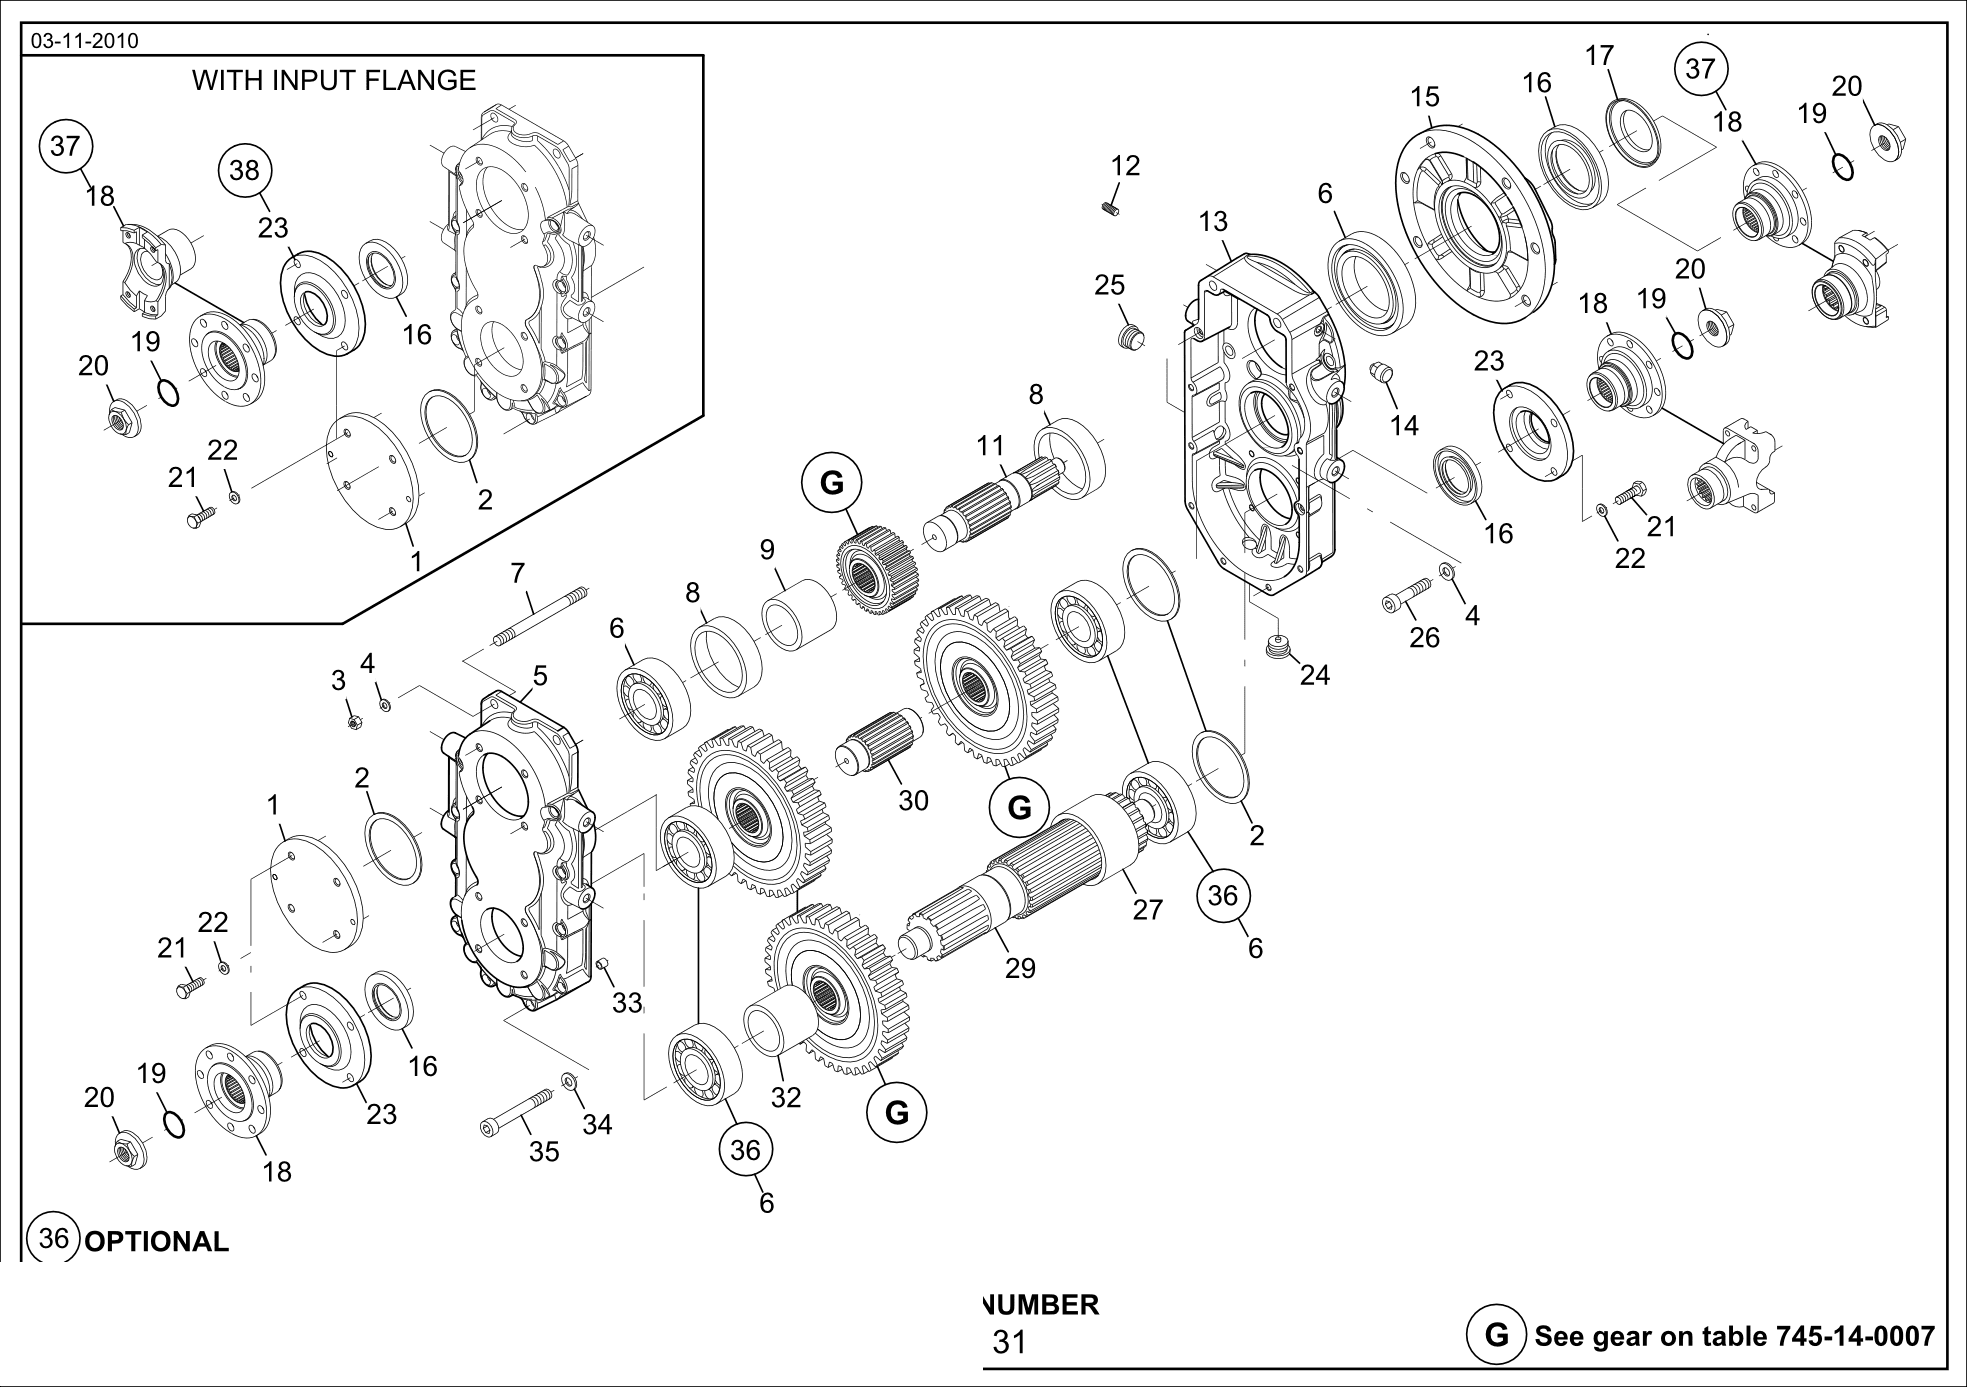 drawing for HSM HOHENLOHER 1398 - VENT (figure 3)